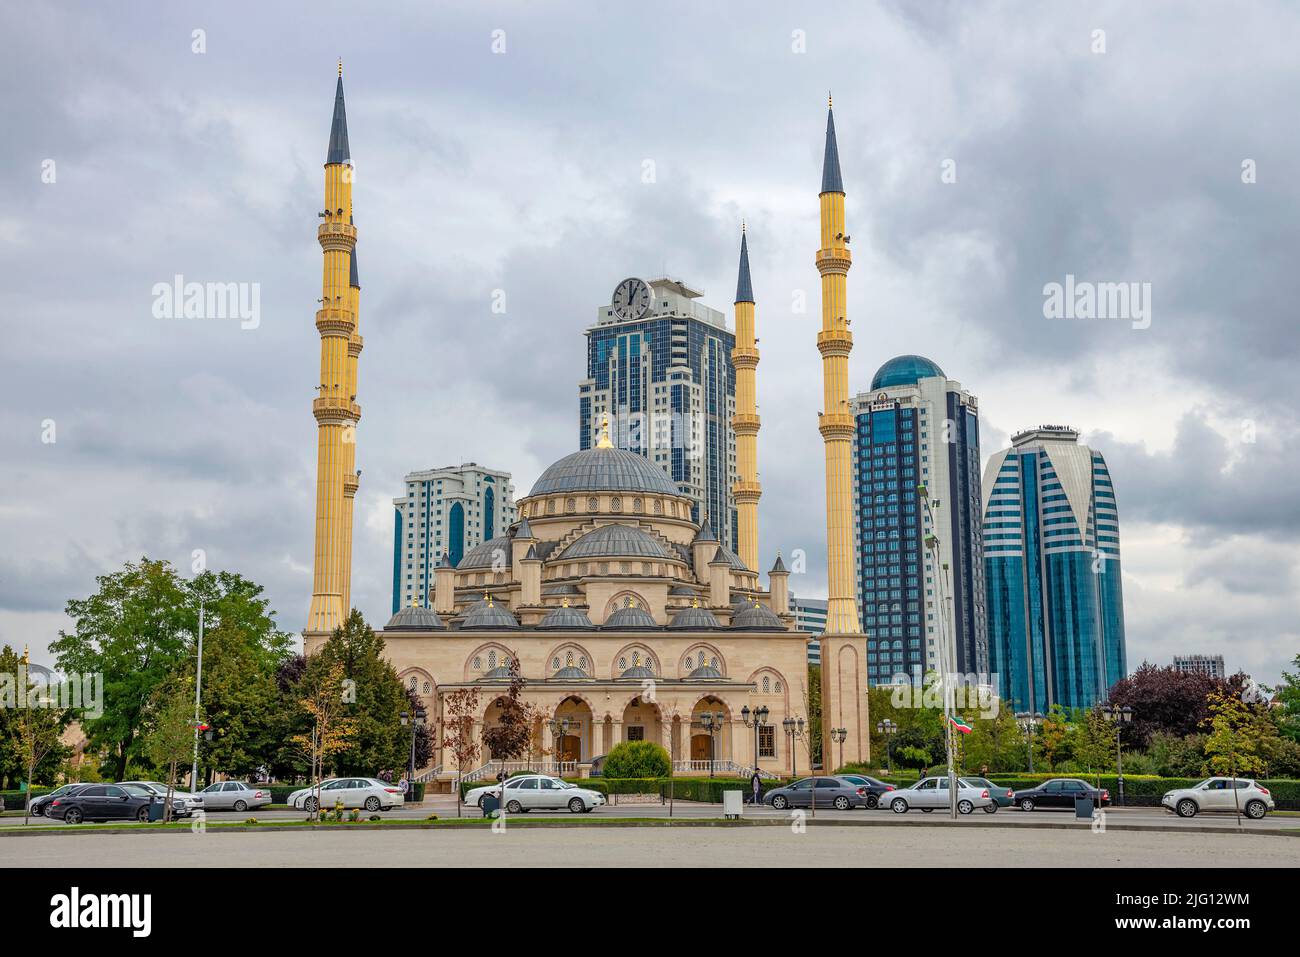 GROZNY, RUSSIA - SEPTEMBER 29, 2021: The Heart of Chechnya Mosque on the background of the Grozny City complex, Chechen Republic Stock Photo